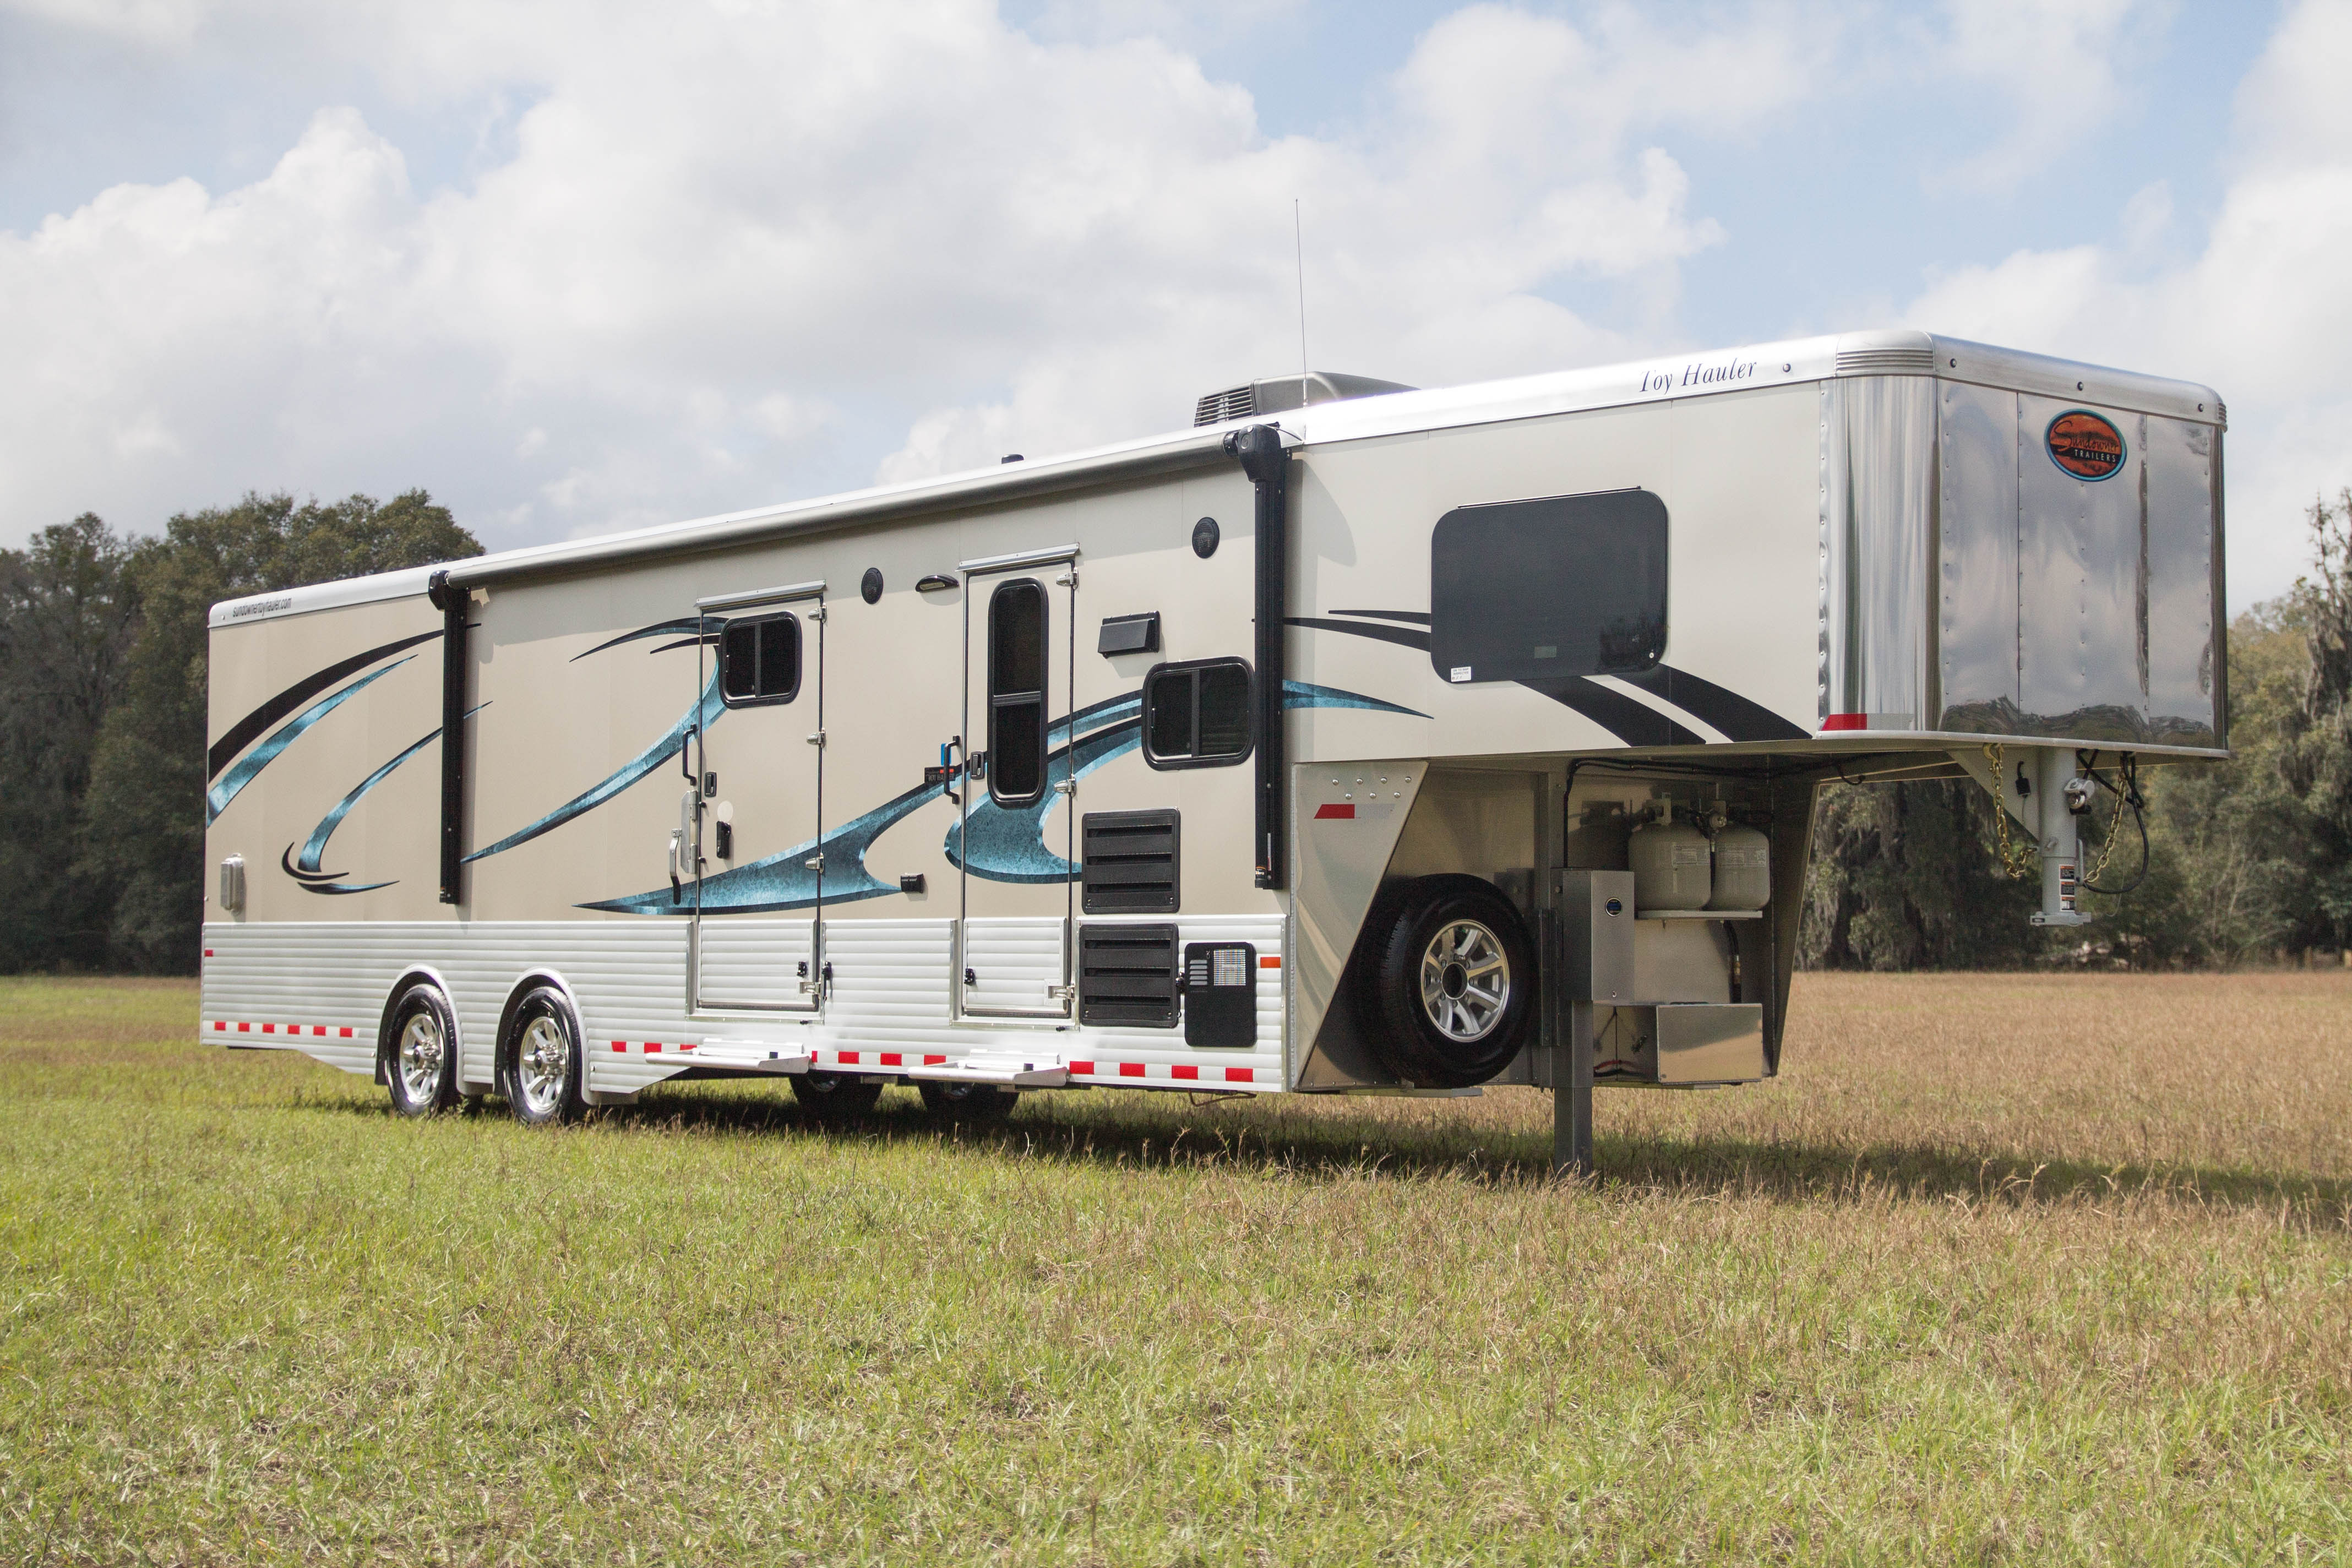 Shop over 150,000 trailers to find the perfect sundowner trailers toy haule...